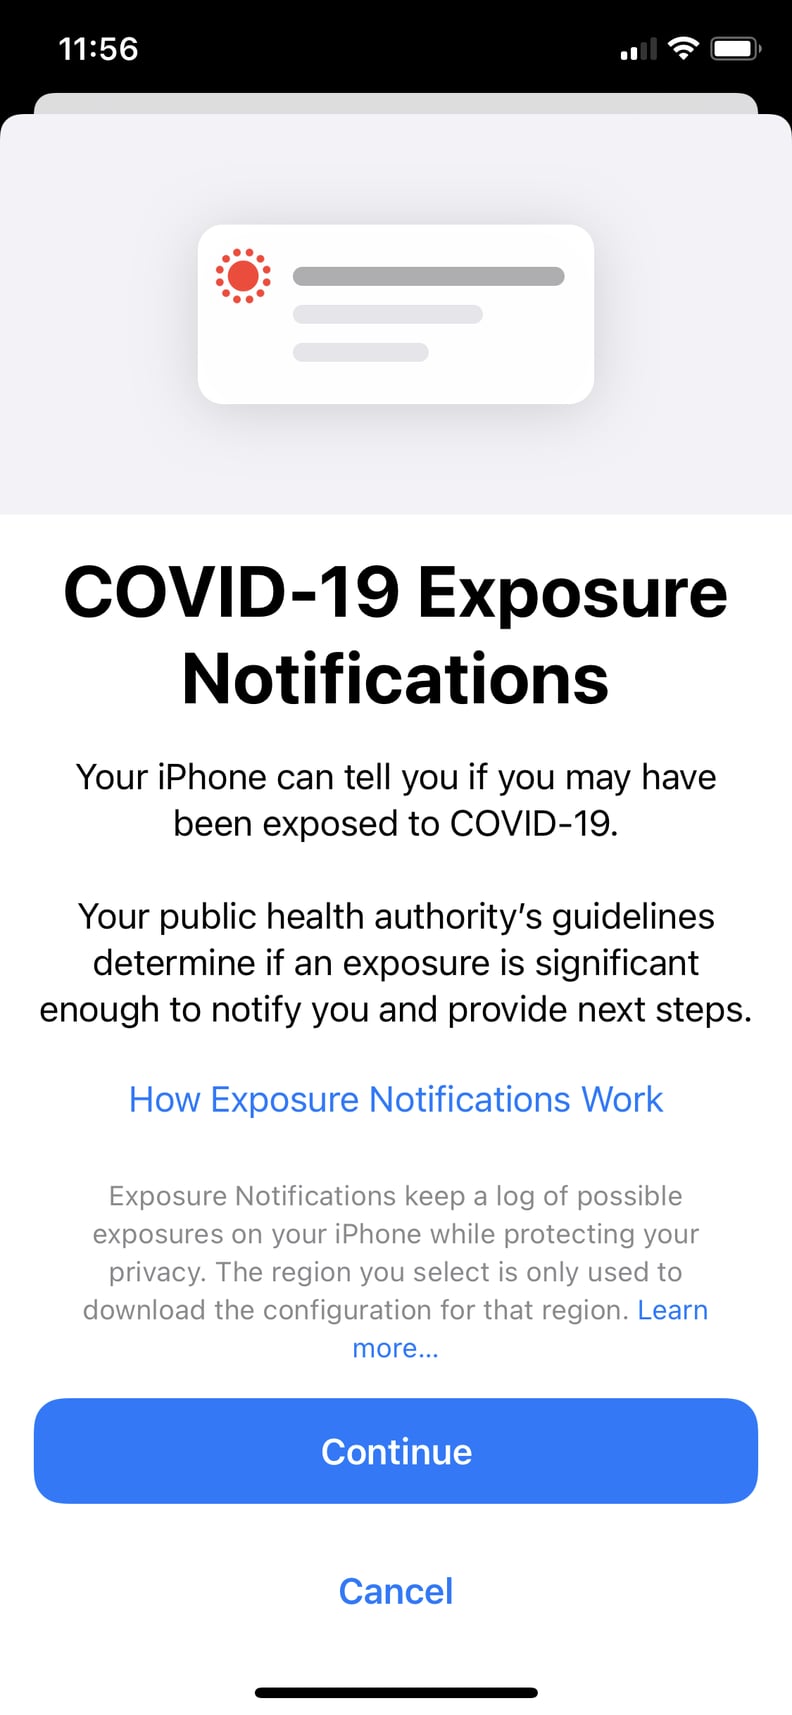 Read Up on How Exposure Notifications Work, and Hit "Continue"